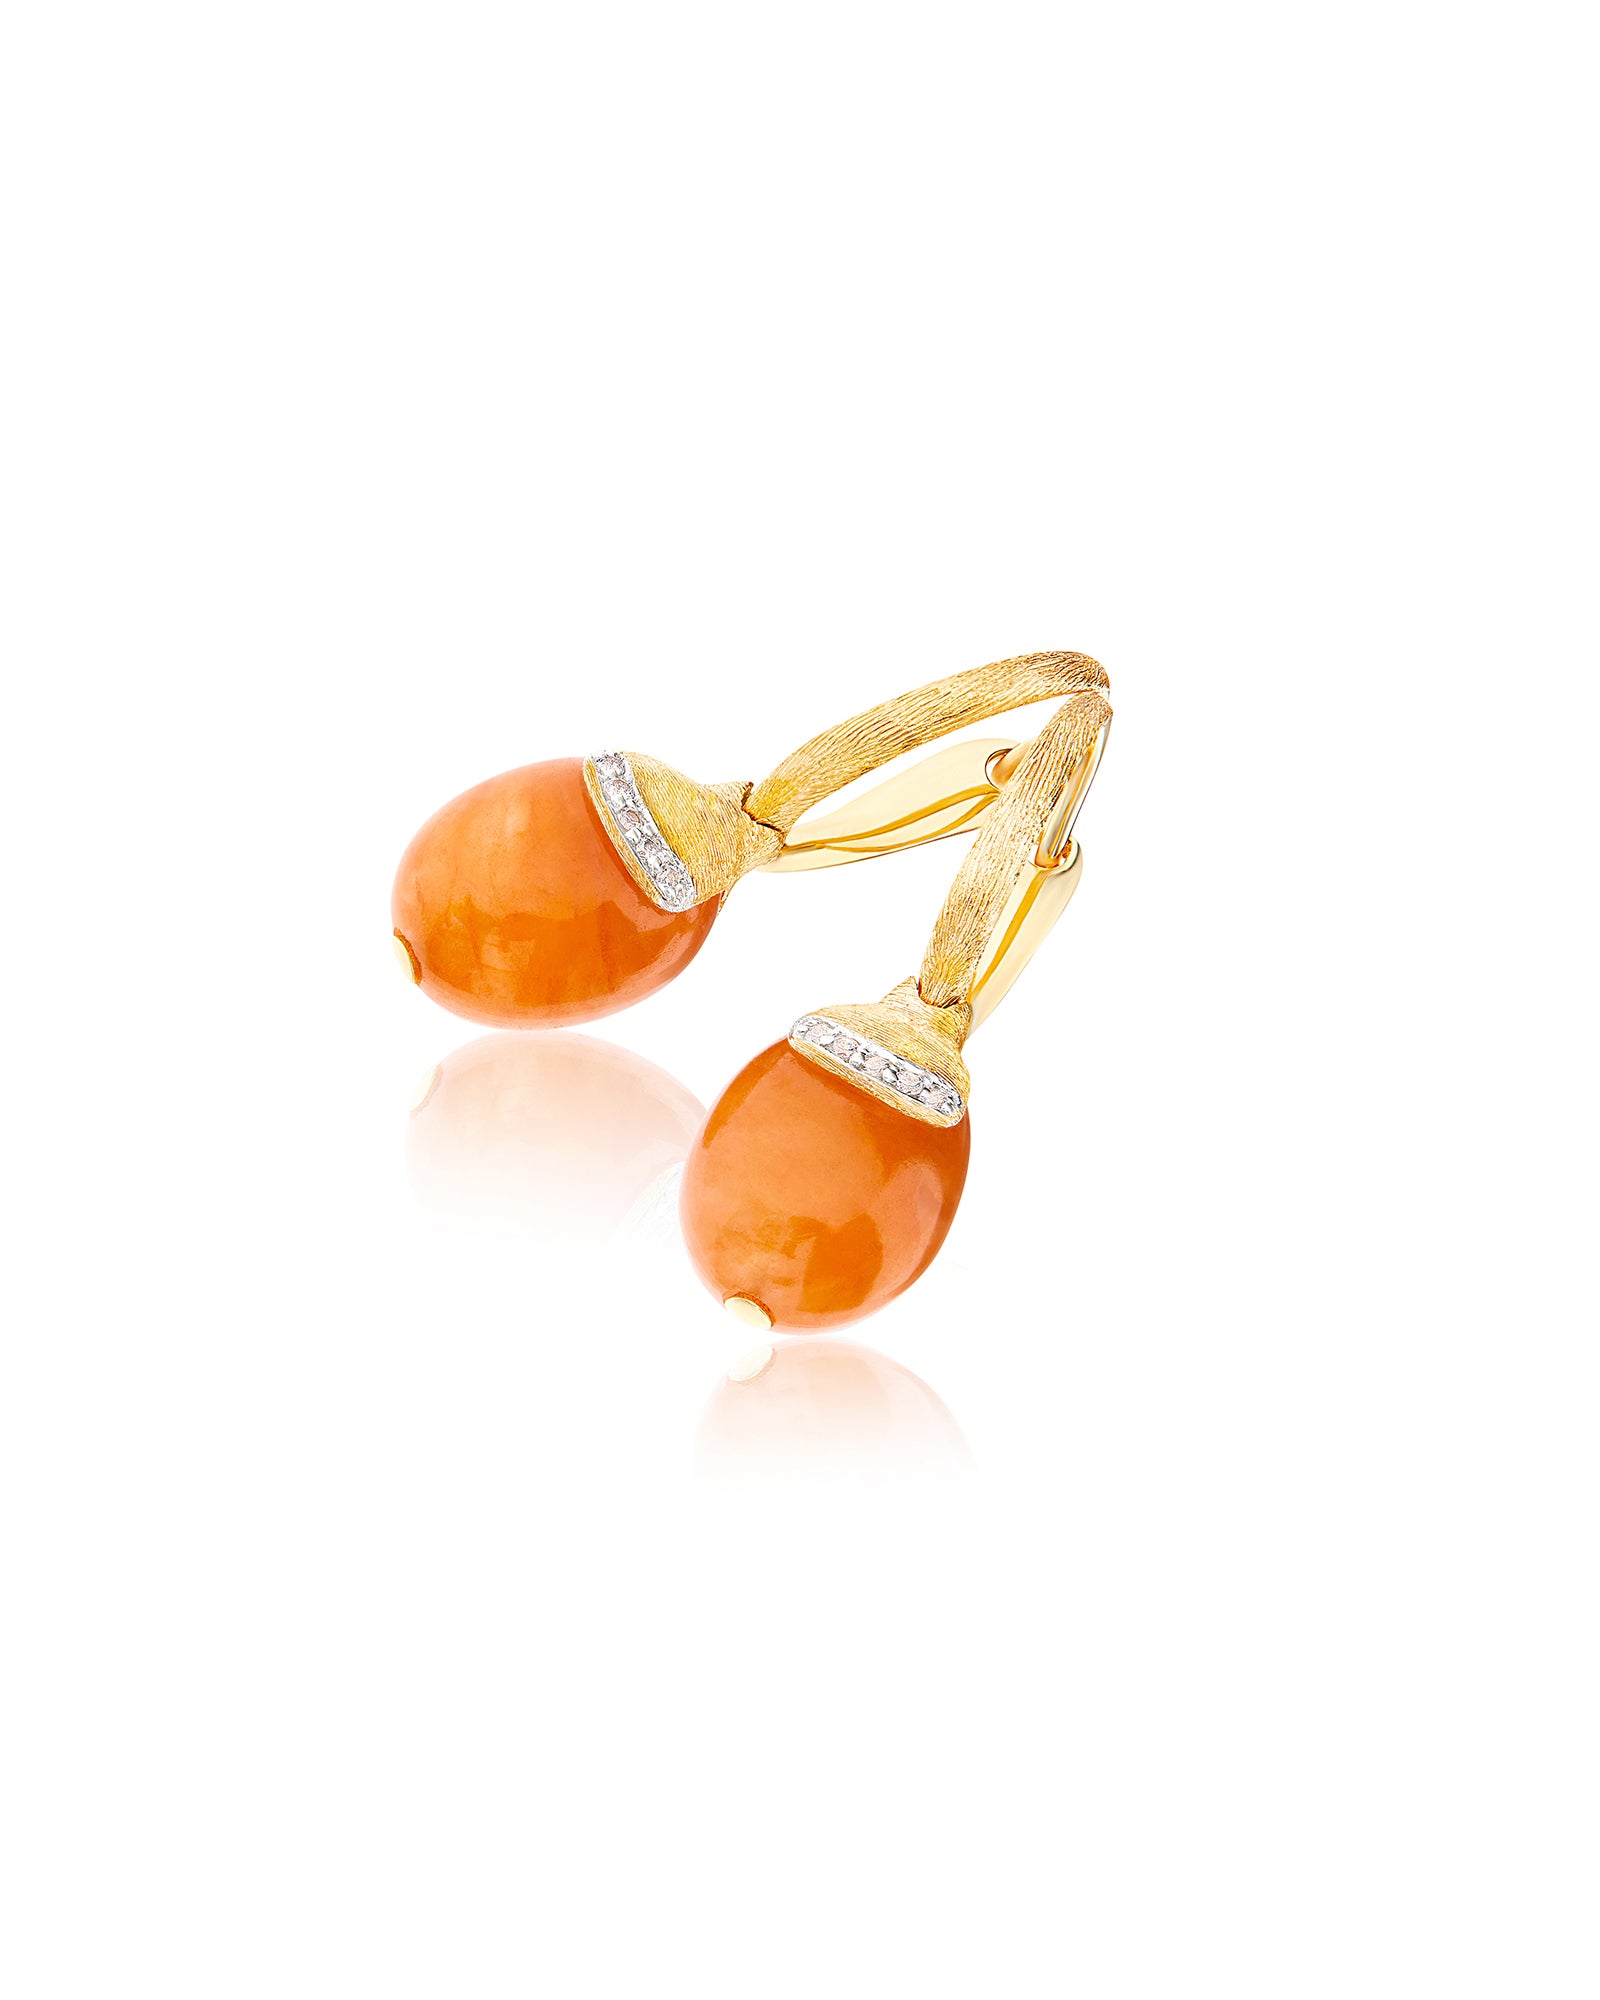 Nanis PETRA "AMULETS" CILIEGINE GOLD AND ORANGE AVENTURINE BALL DROP EARRINGS WITH DIAMONDS DETAILS (SMALL) OS11-603